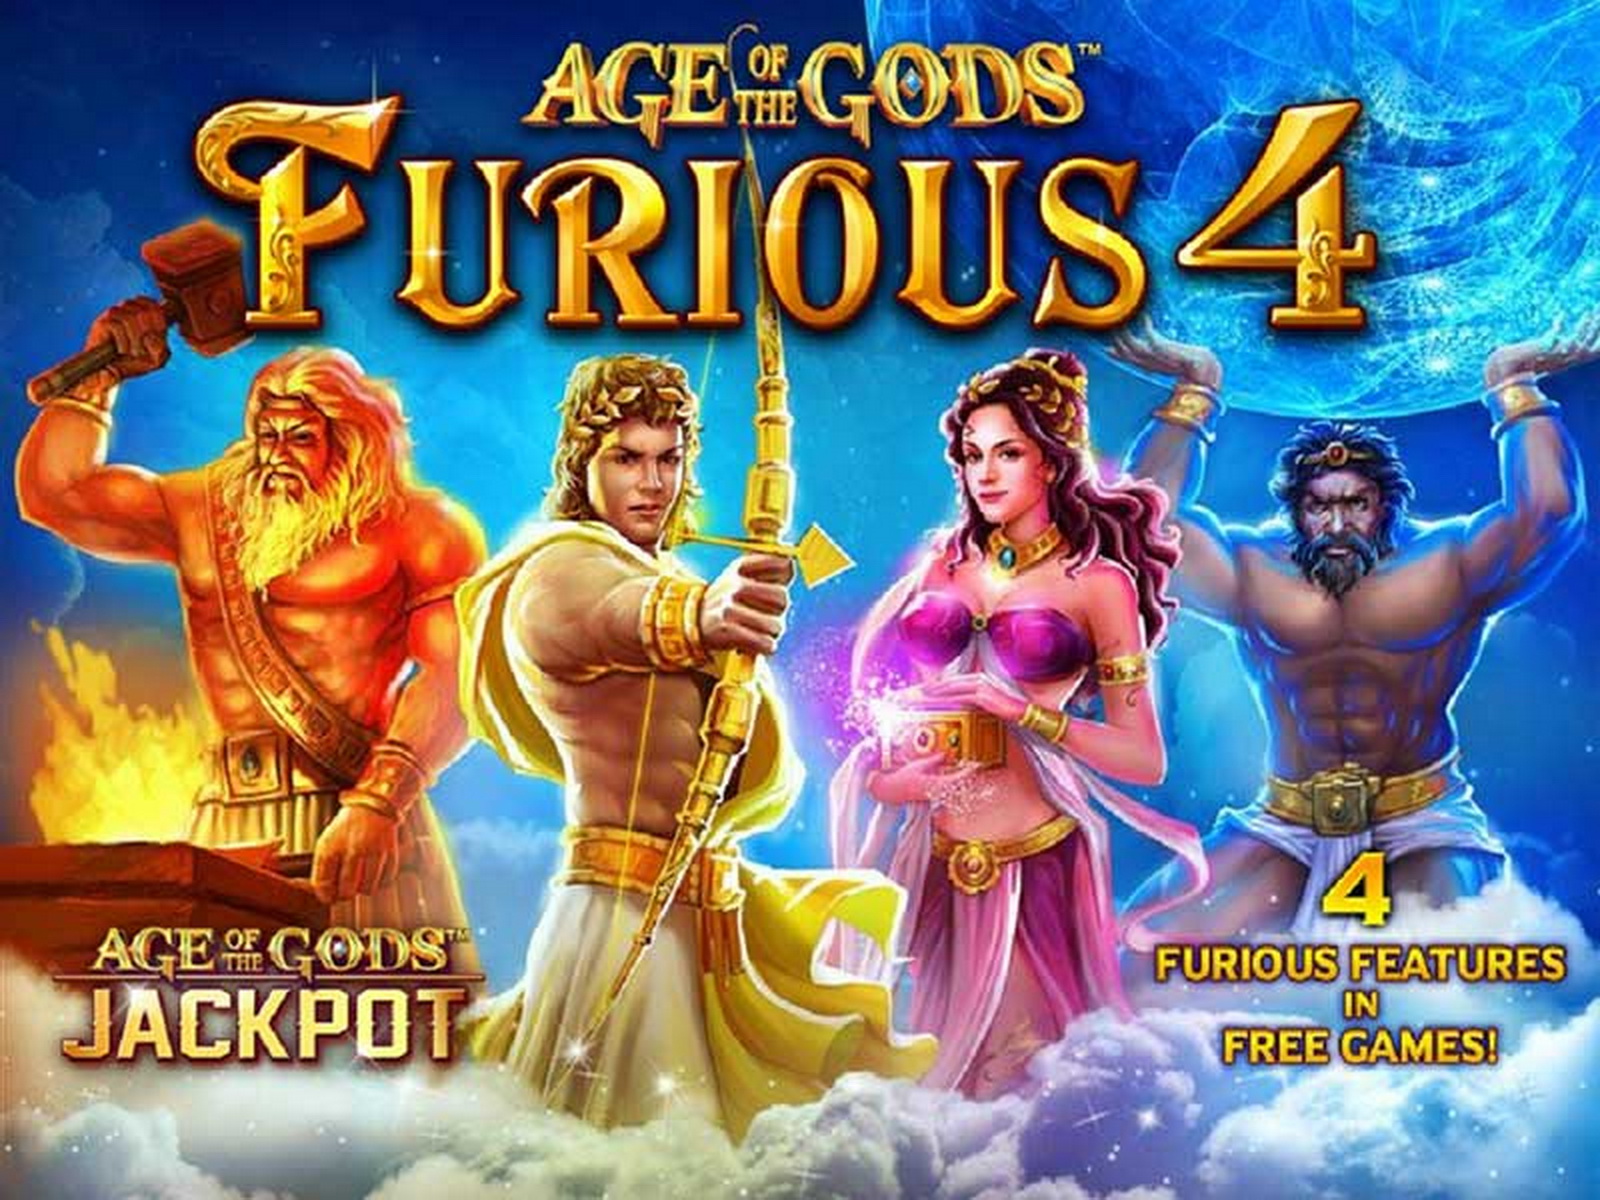 The Age of the Gods: Furious Four Online Slot Demo Game by Playtech